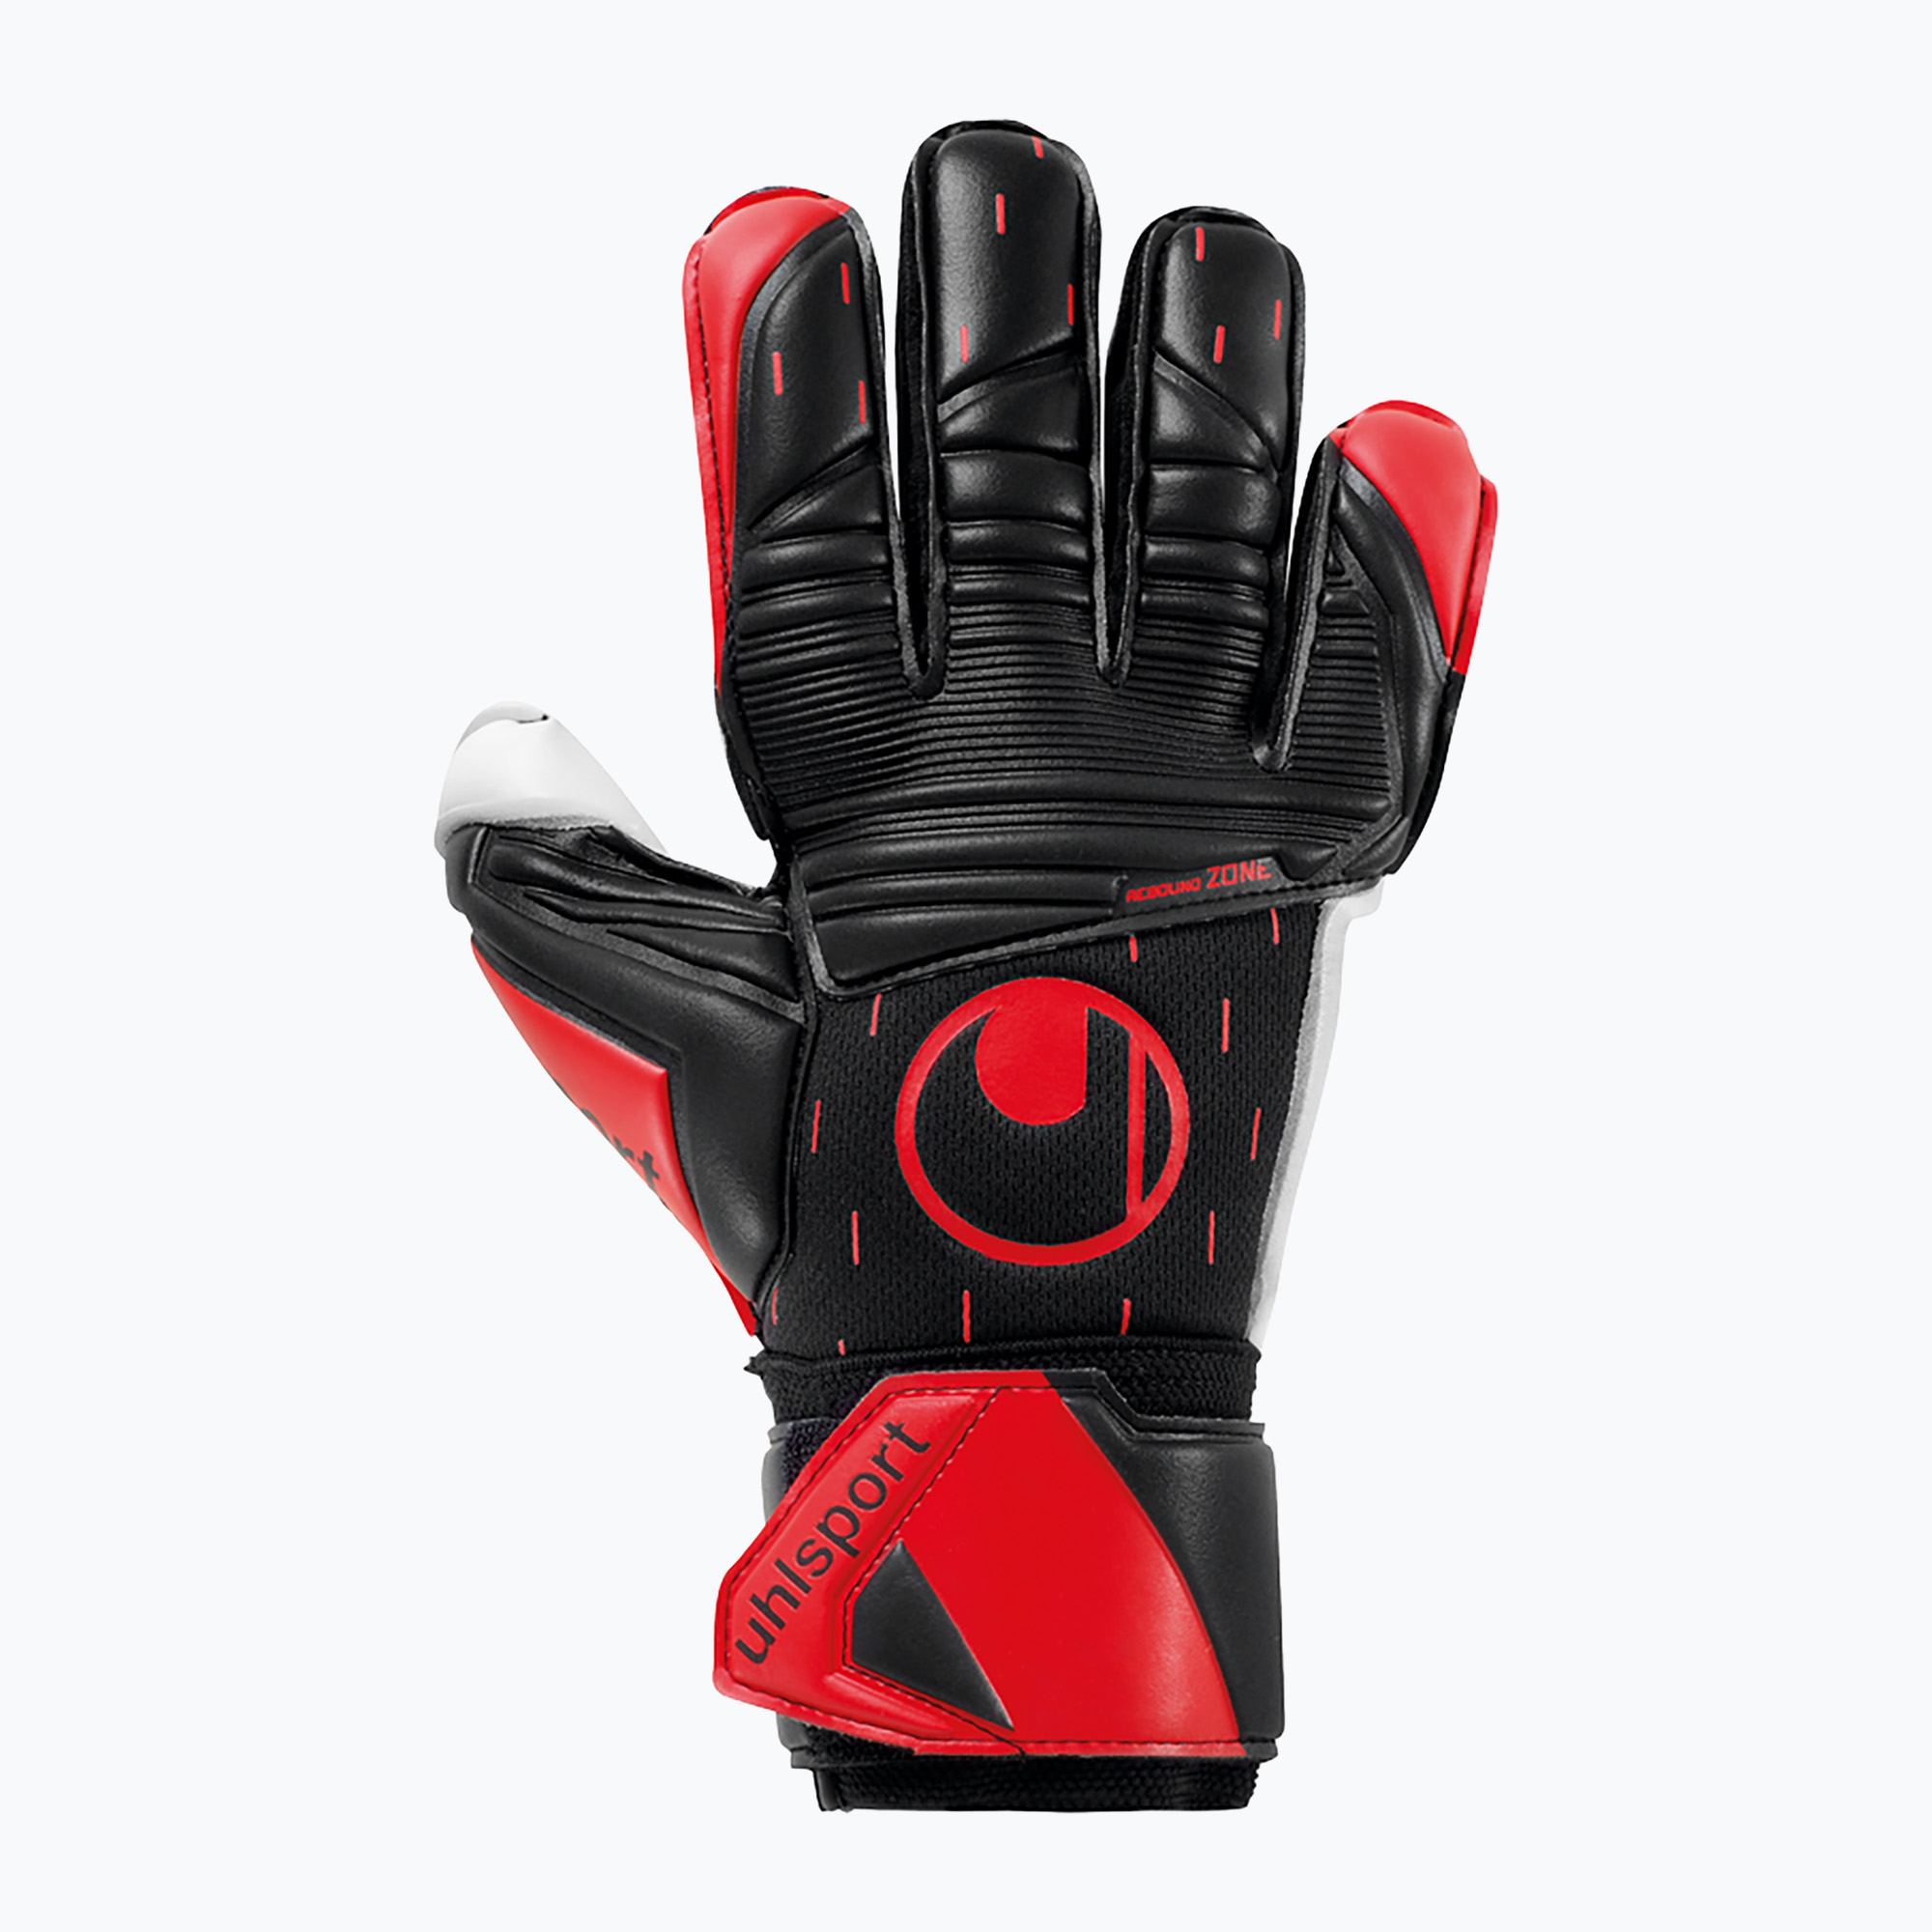 Детски вратарски ръкавици uhlsport Classic Absolutgrip black/red/white